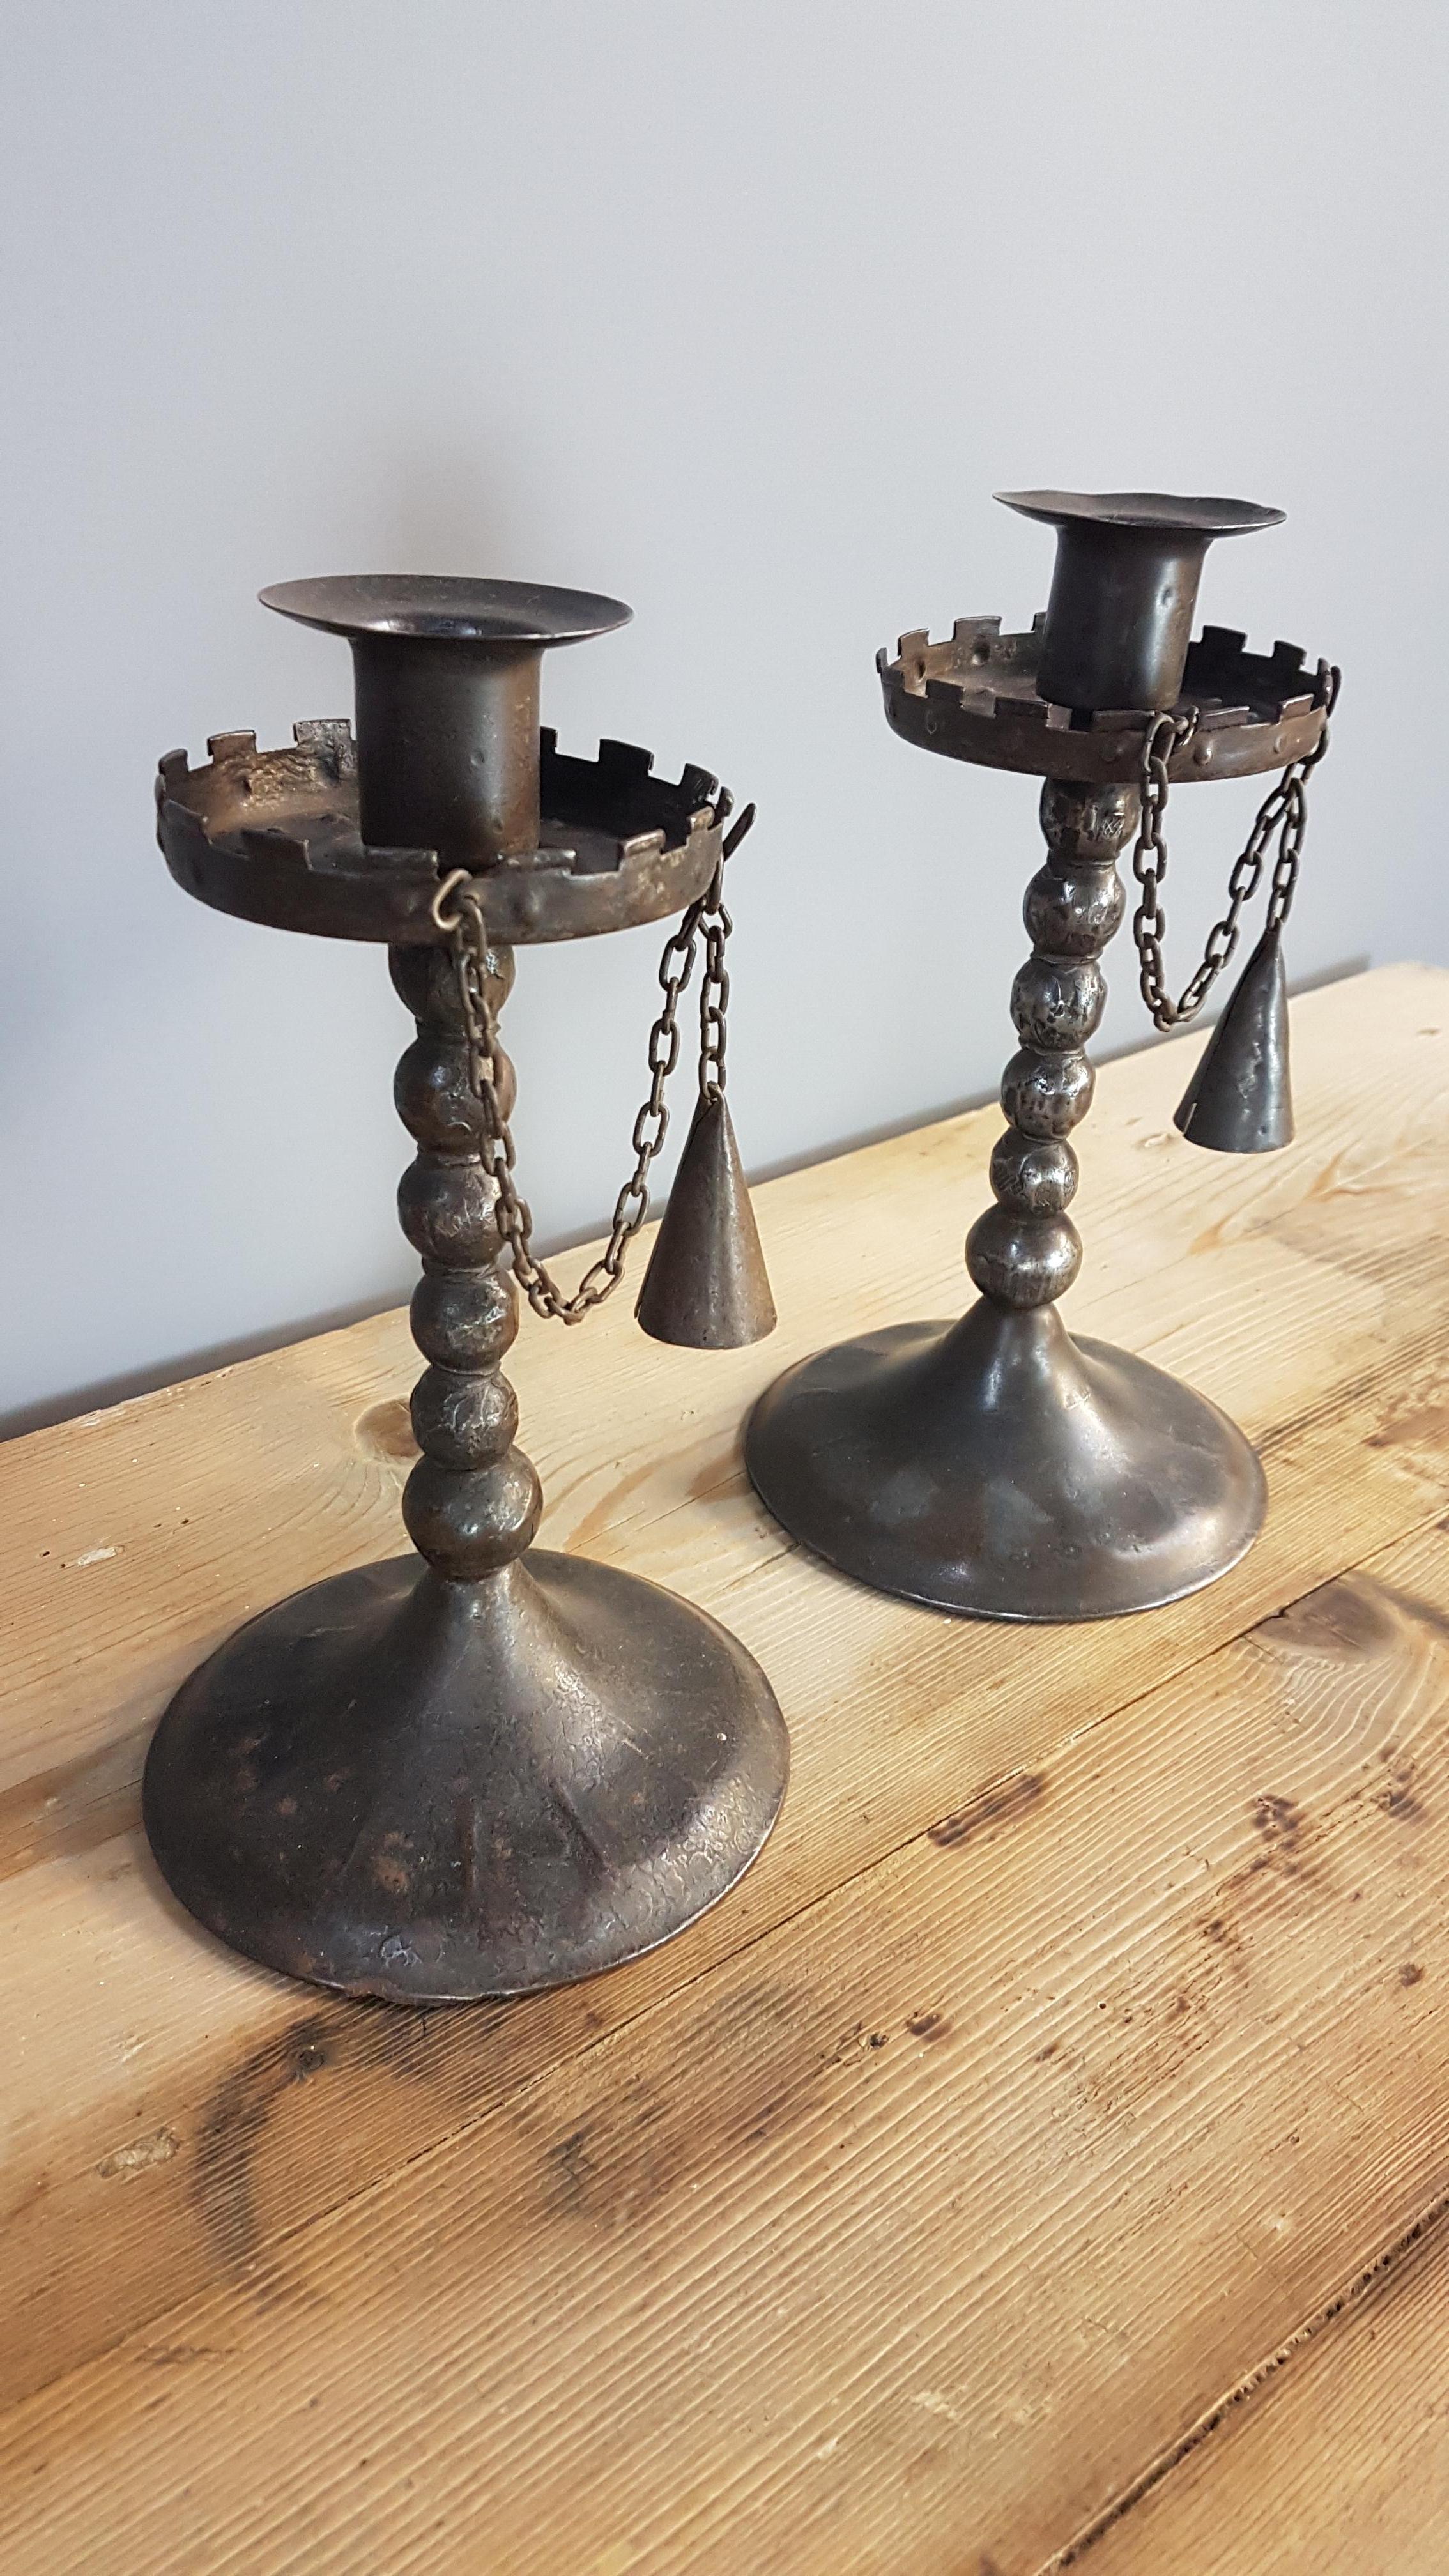 A superb and rare pair of Hugo bergère 'Goberg' arts and crafts candle stands with their original chains and candle snuffers. These have a Lump metal style with castellated formed tops. Measures 12cm diameter at the base and a height of 21cm